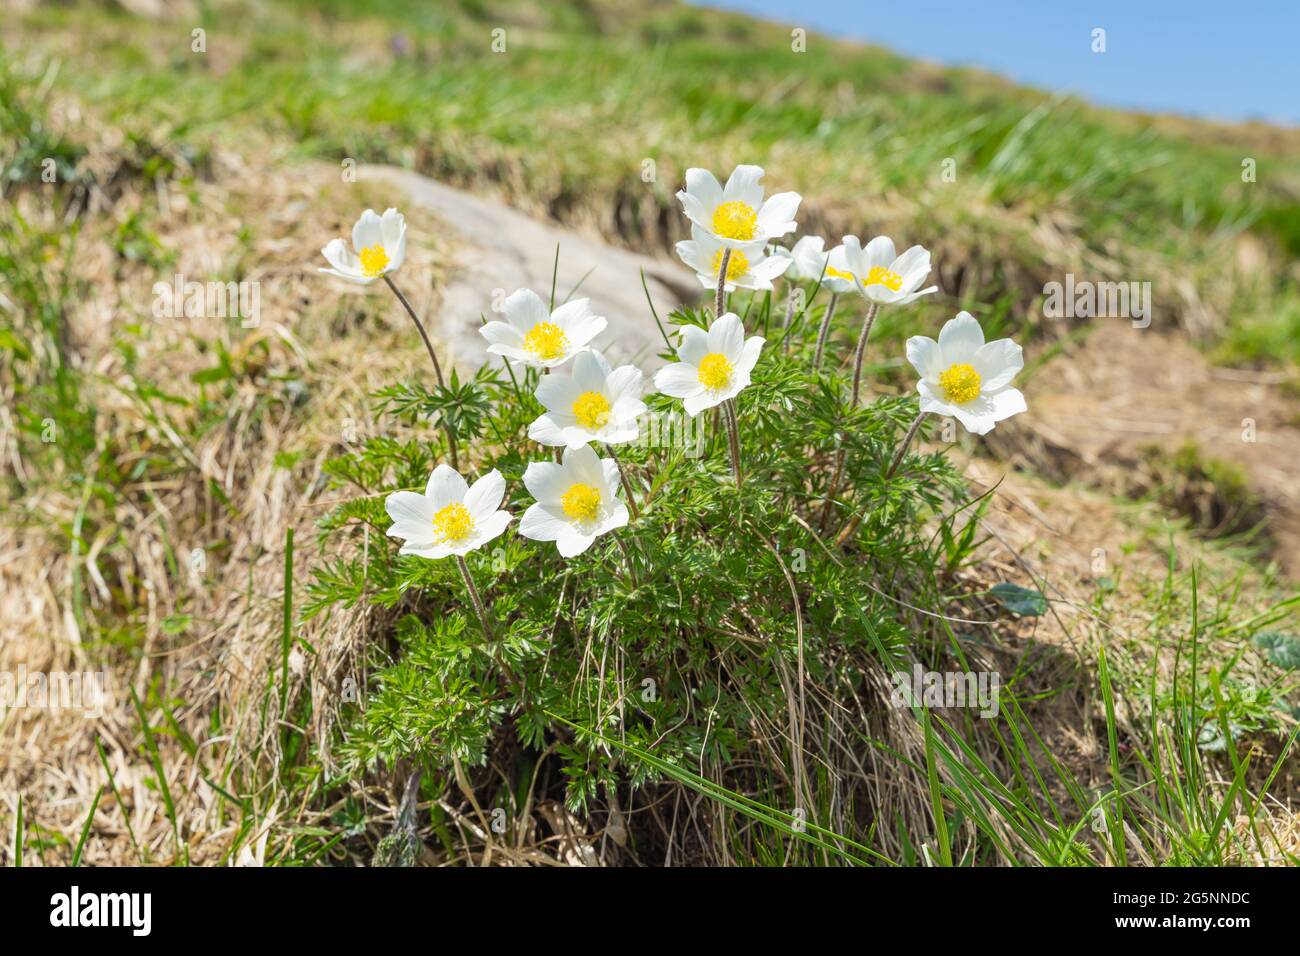 Dream-the beautiful grass Pulsatilla patens (White) delicate fragile flowers blooms in the spring in the mountains. Stock Photo